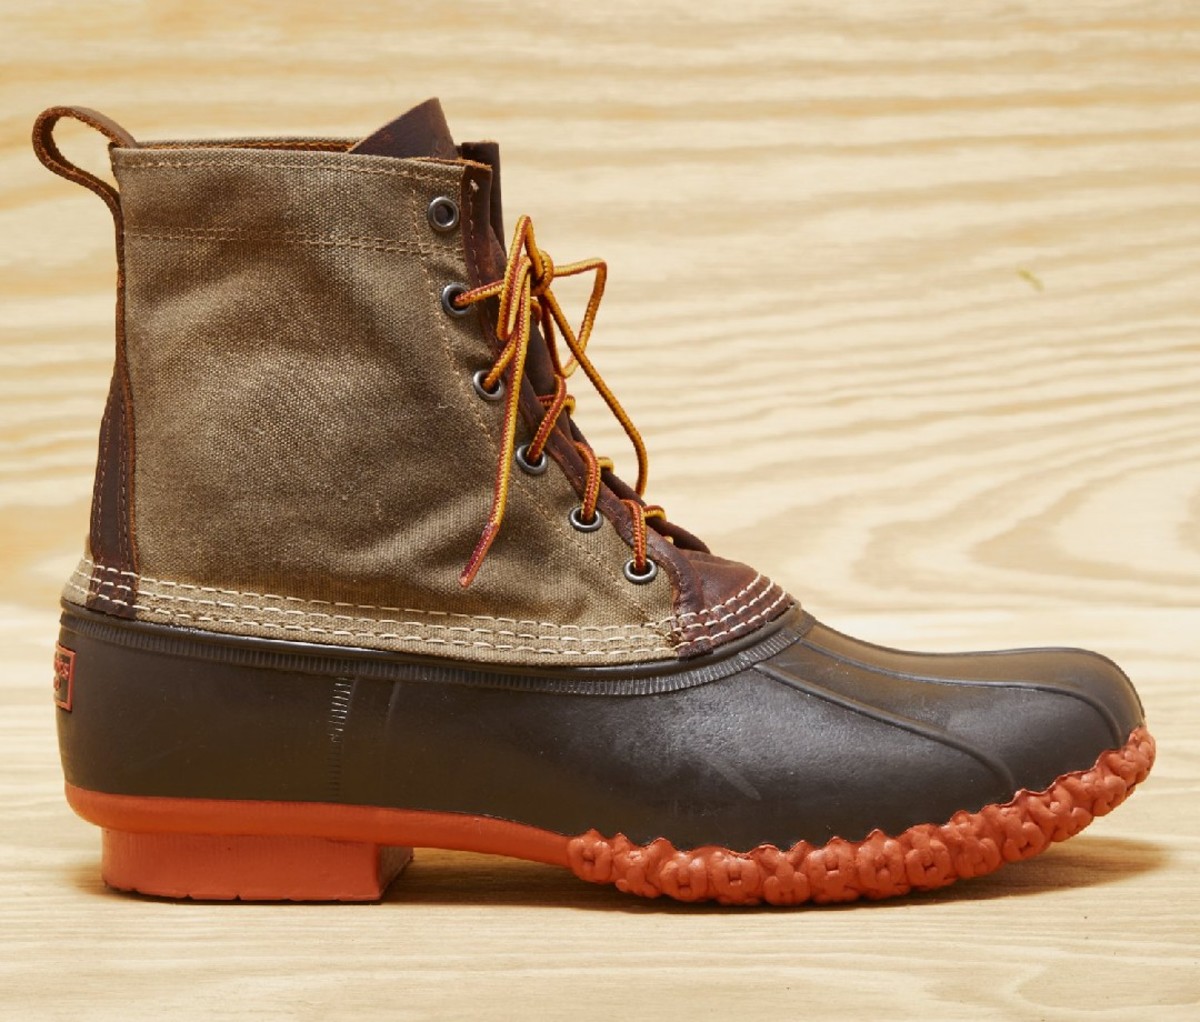 Rain Boots You Won't Be Embarrassed to Wear in Public | Men's Journal ...